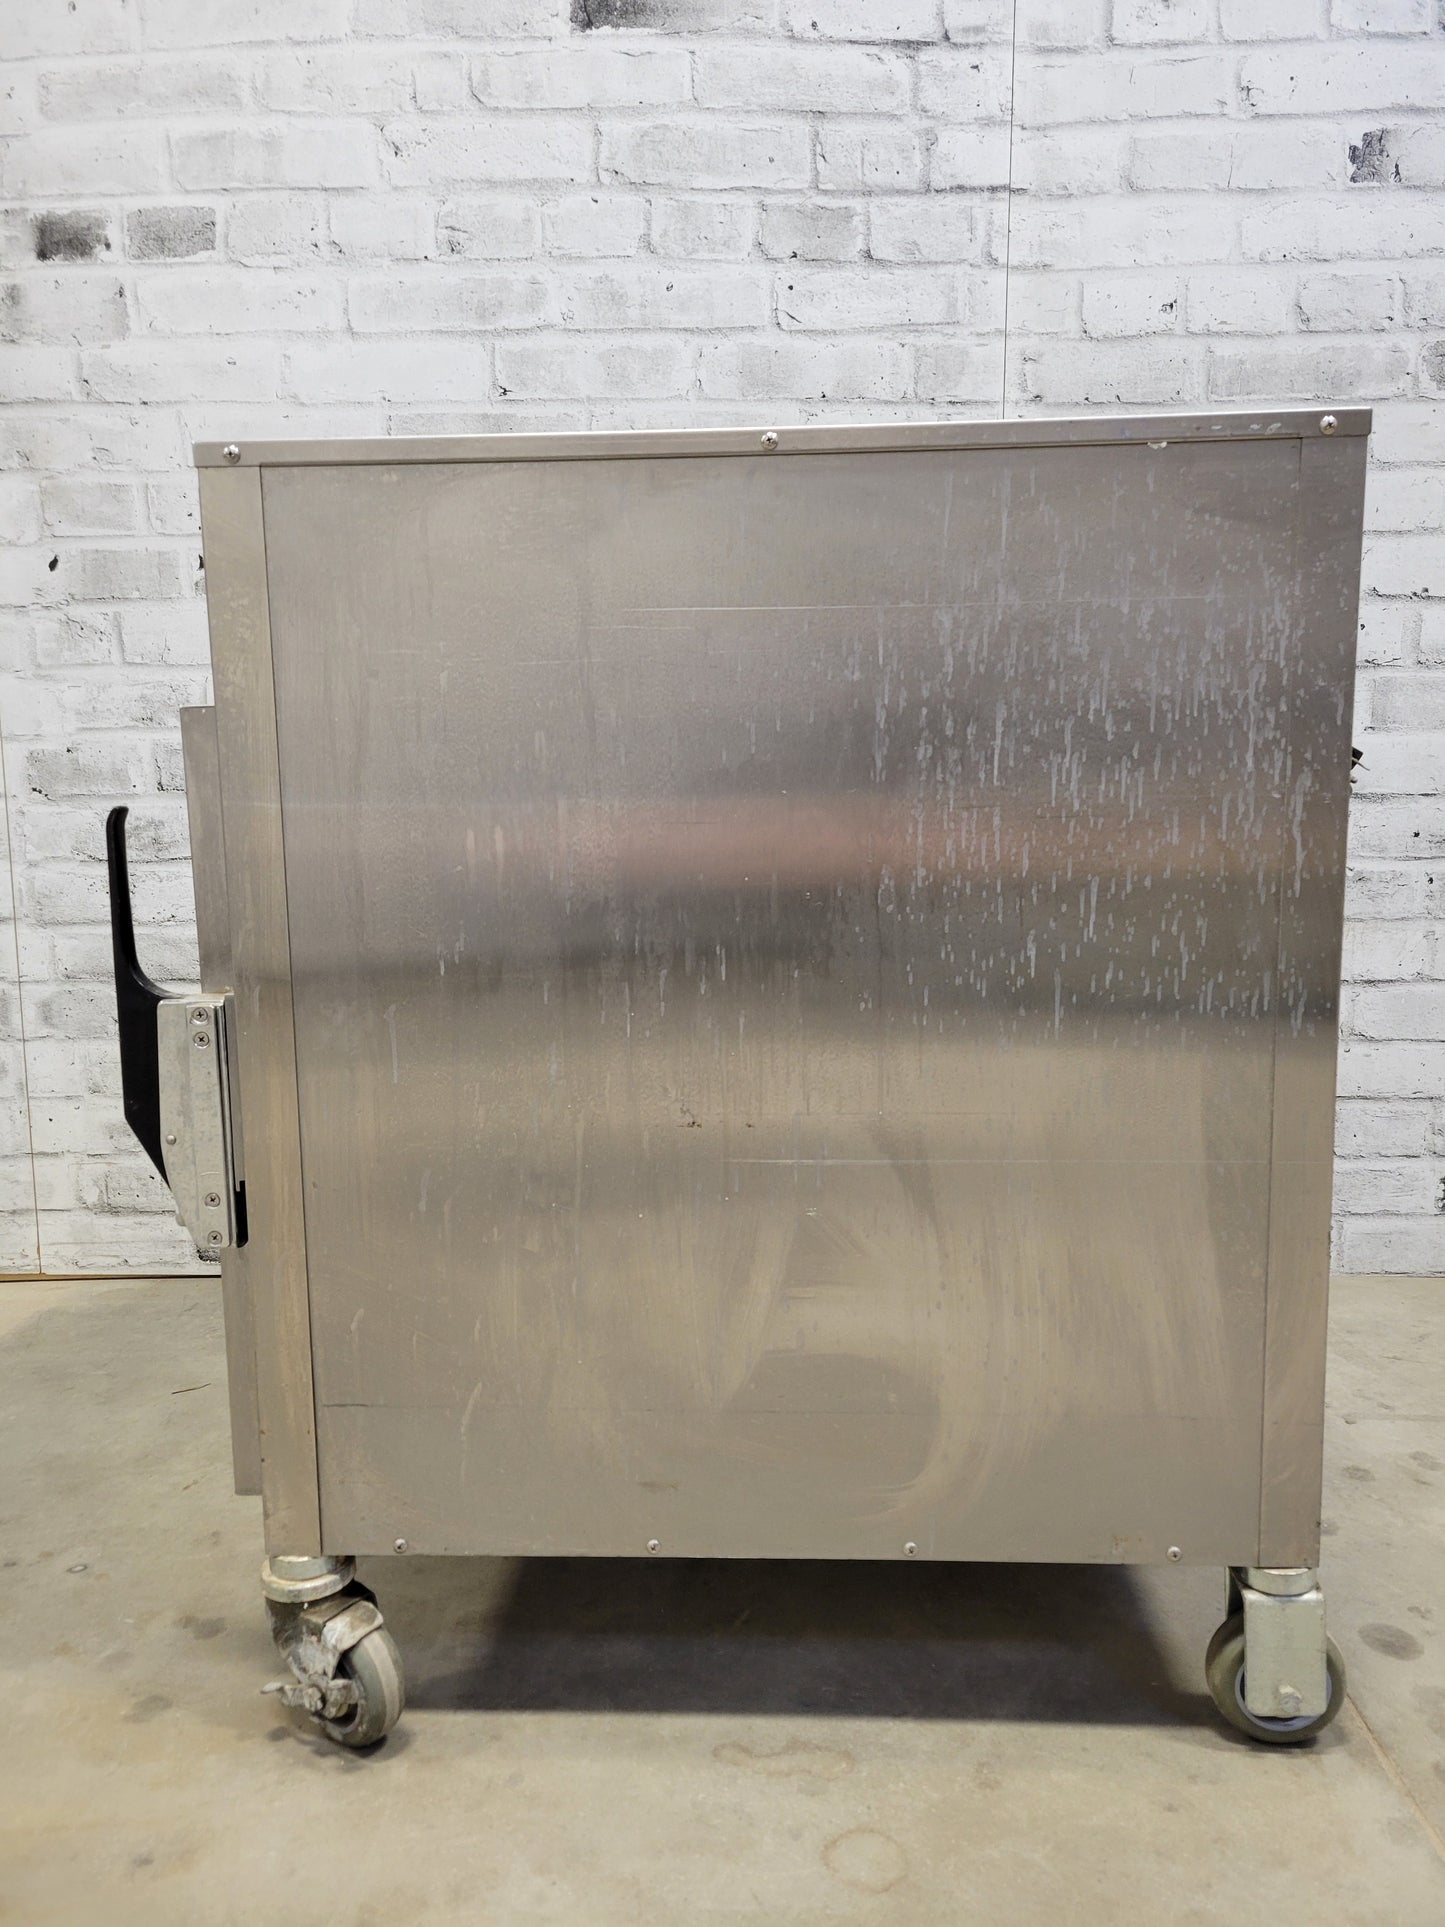 BSF PRE-OWNED Alto-Shaam Canada Halo Heat Holding Cabinet